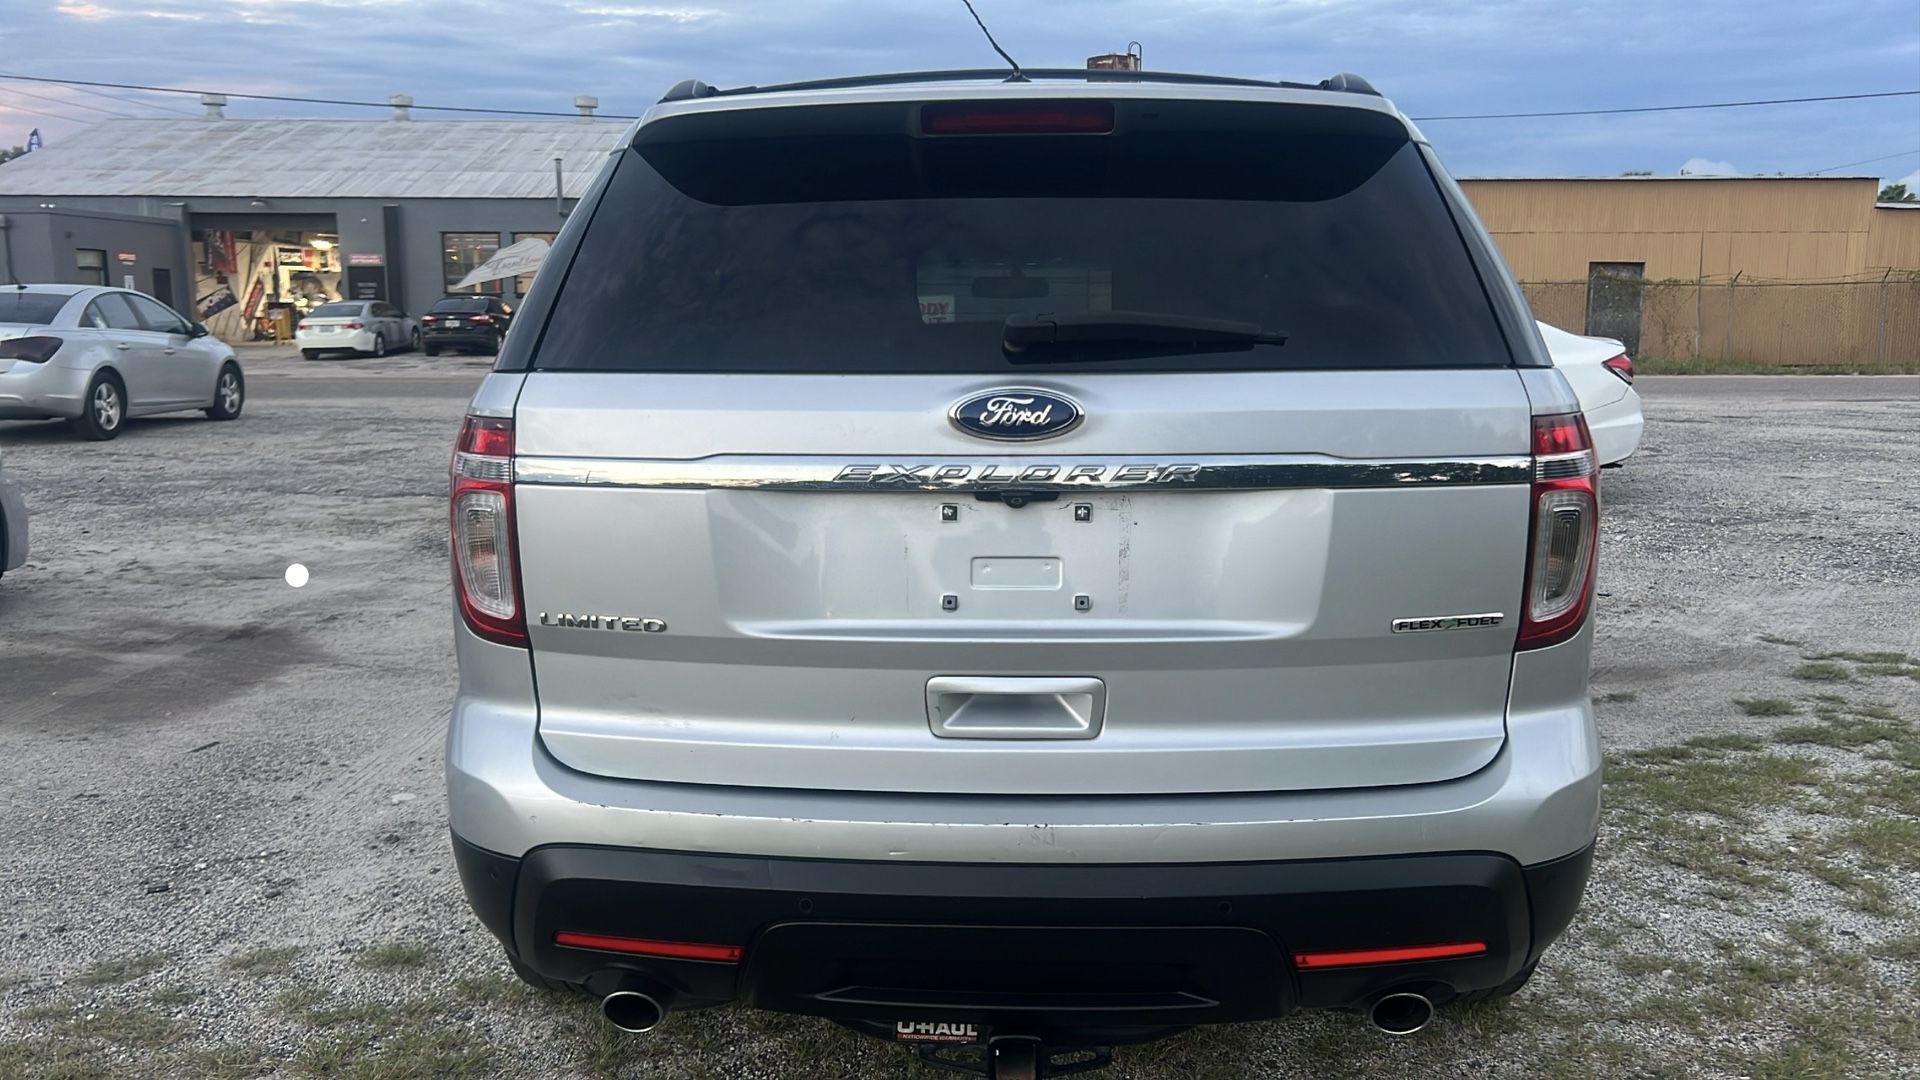 2014 Ford Explorer for Sale in Winter Haven, FL - OfferUp